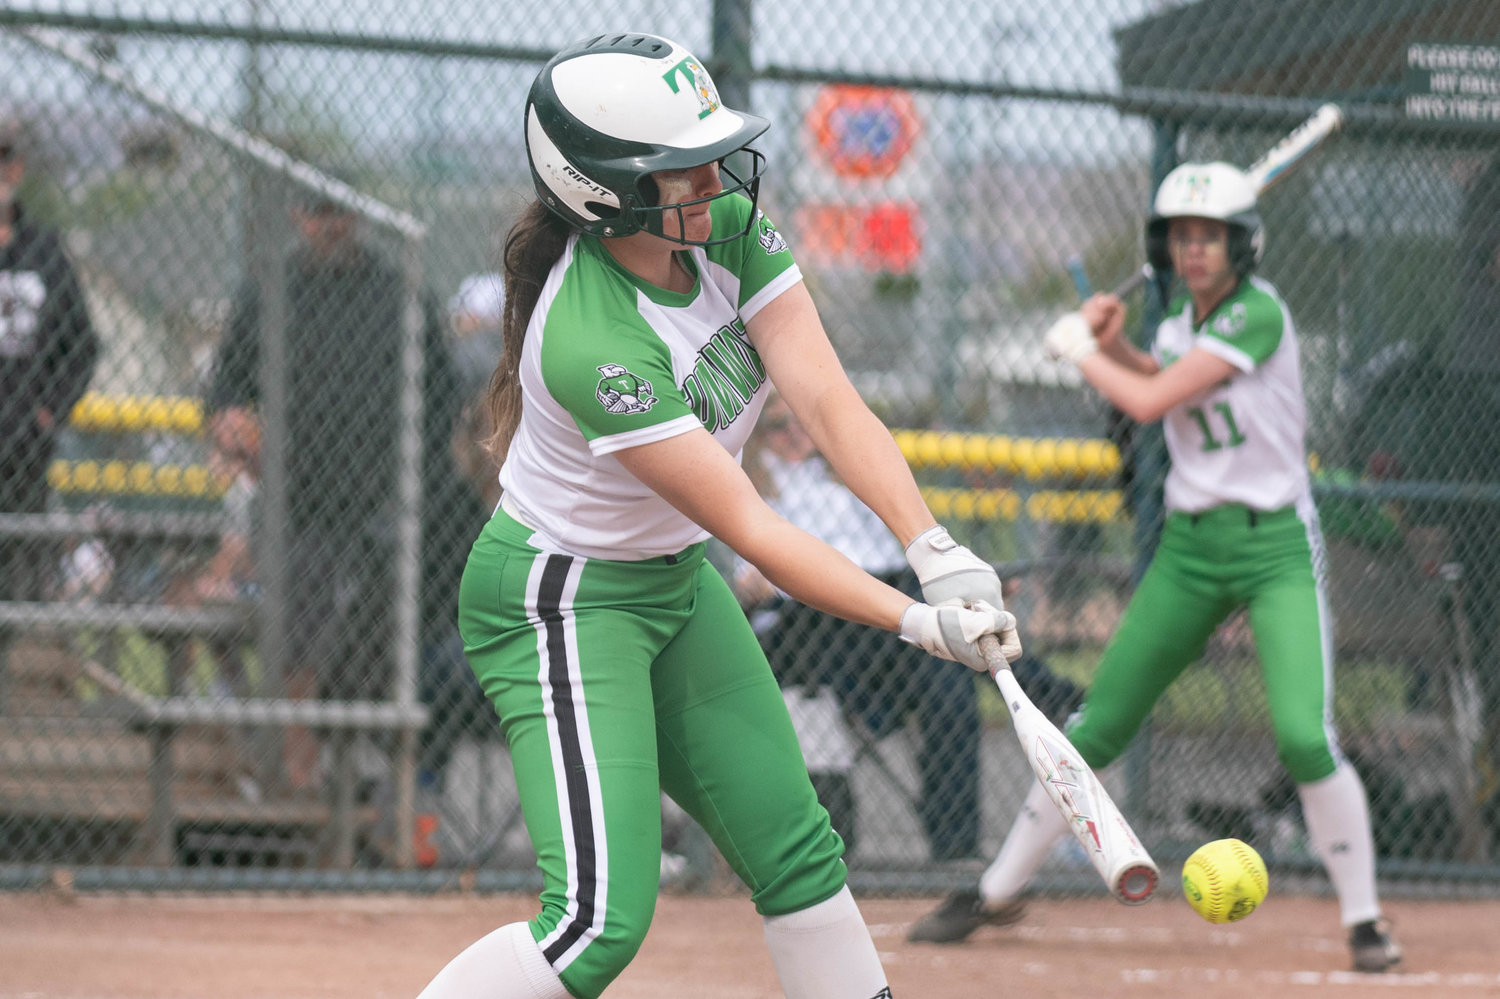 Tumwater's Jaime Haase makes contact with a pitch against Lynden in the 2A State Quarterfinals at Carlon Park in Selah May 27.